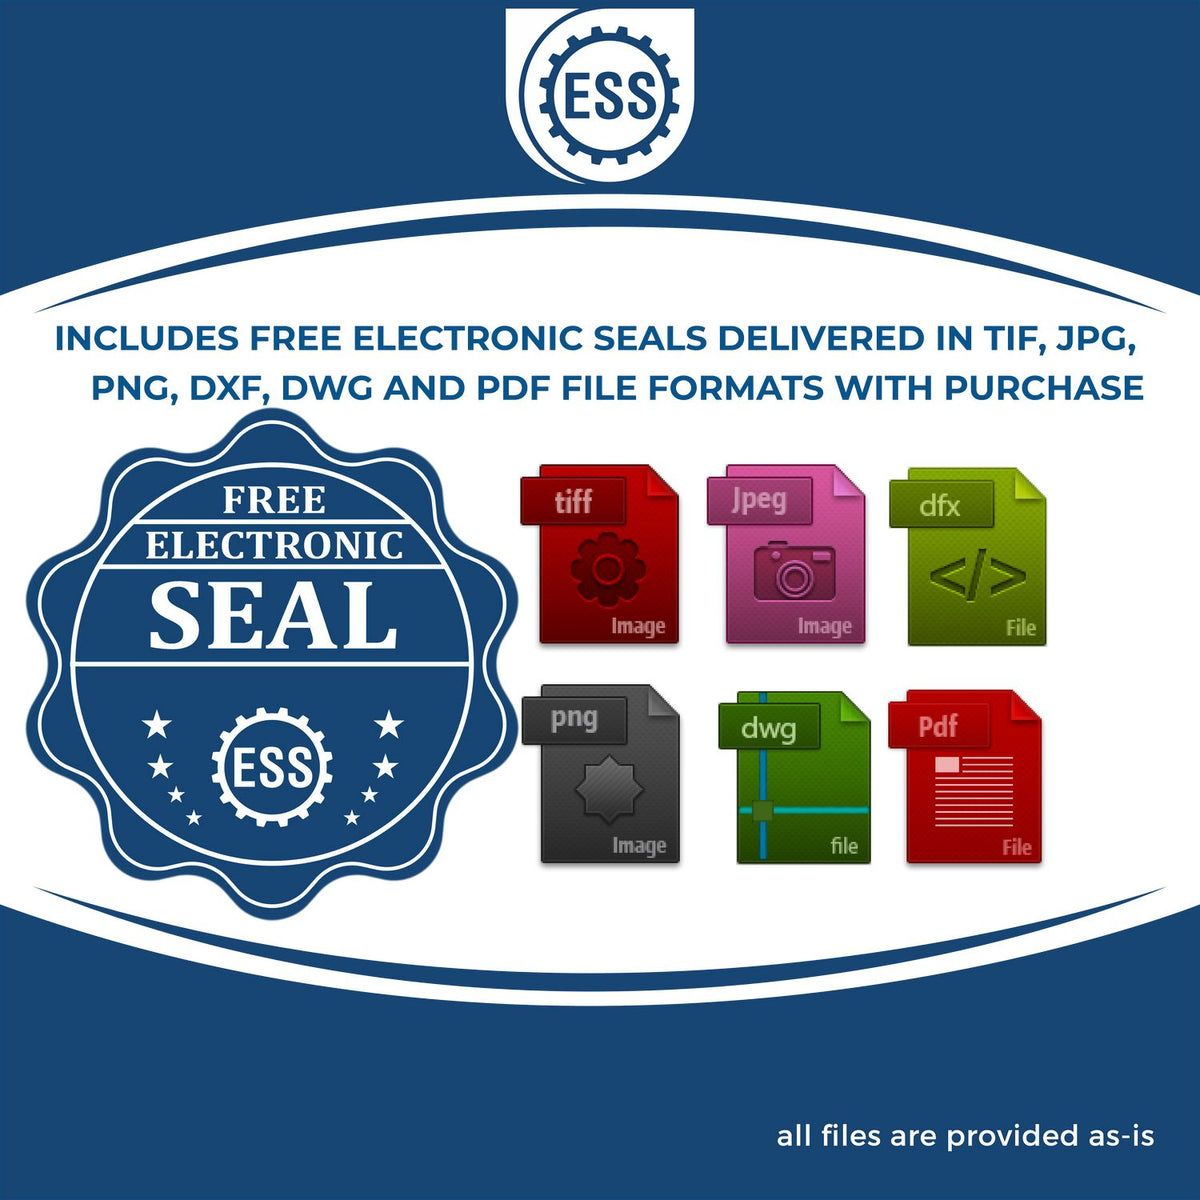 An infographic for the free electronic seal for the Self-Inking Minnesota Landscape Architect Stamp illustrating the different file type icons such as DXF, DWG, TIF, JPG and PNG.